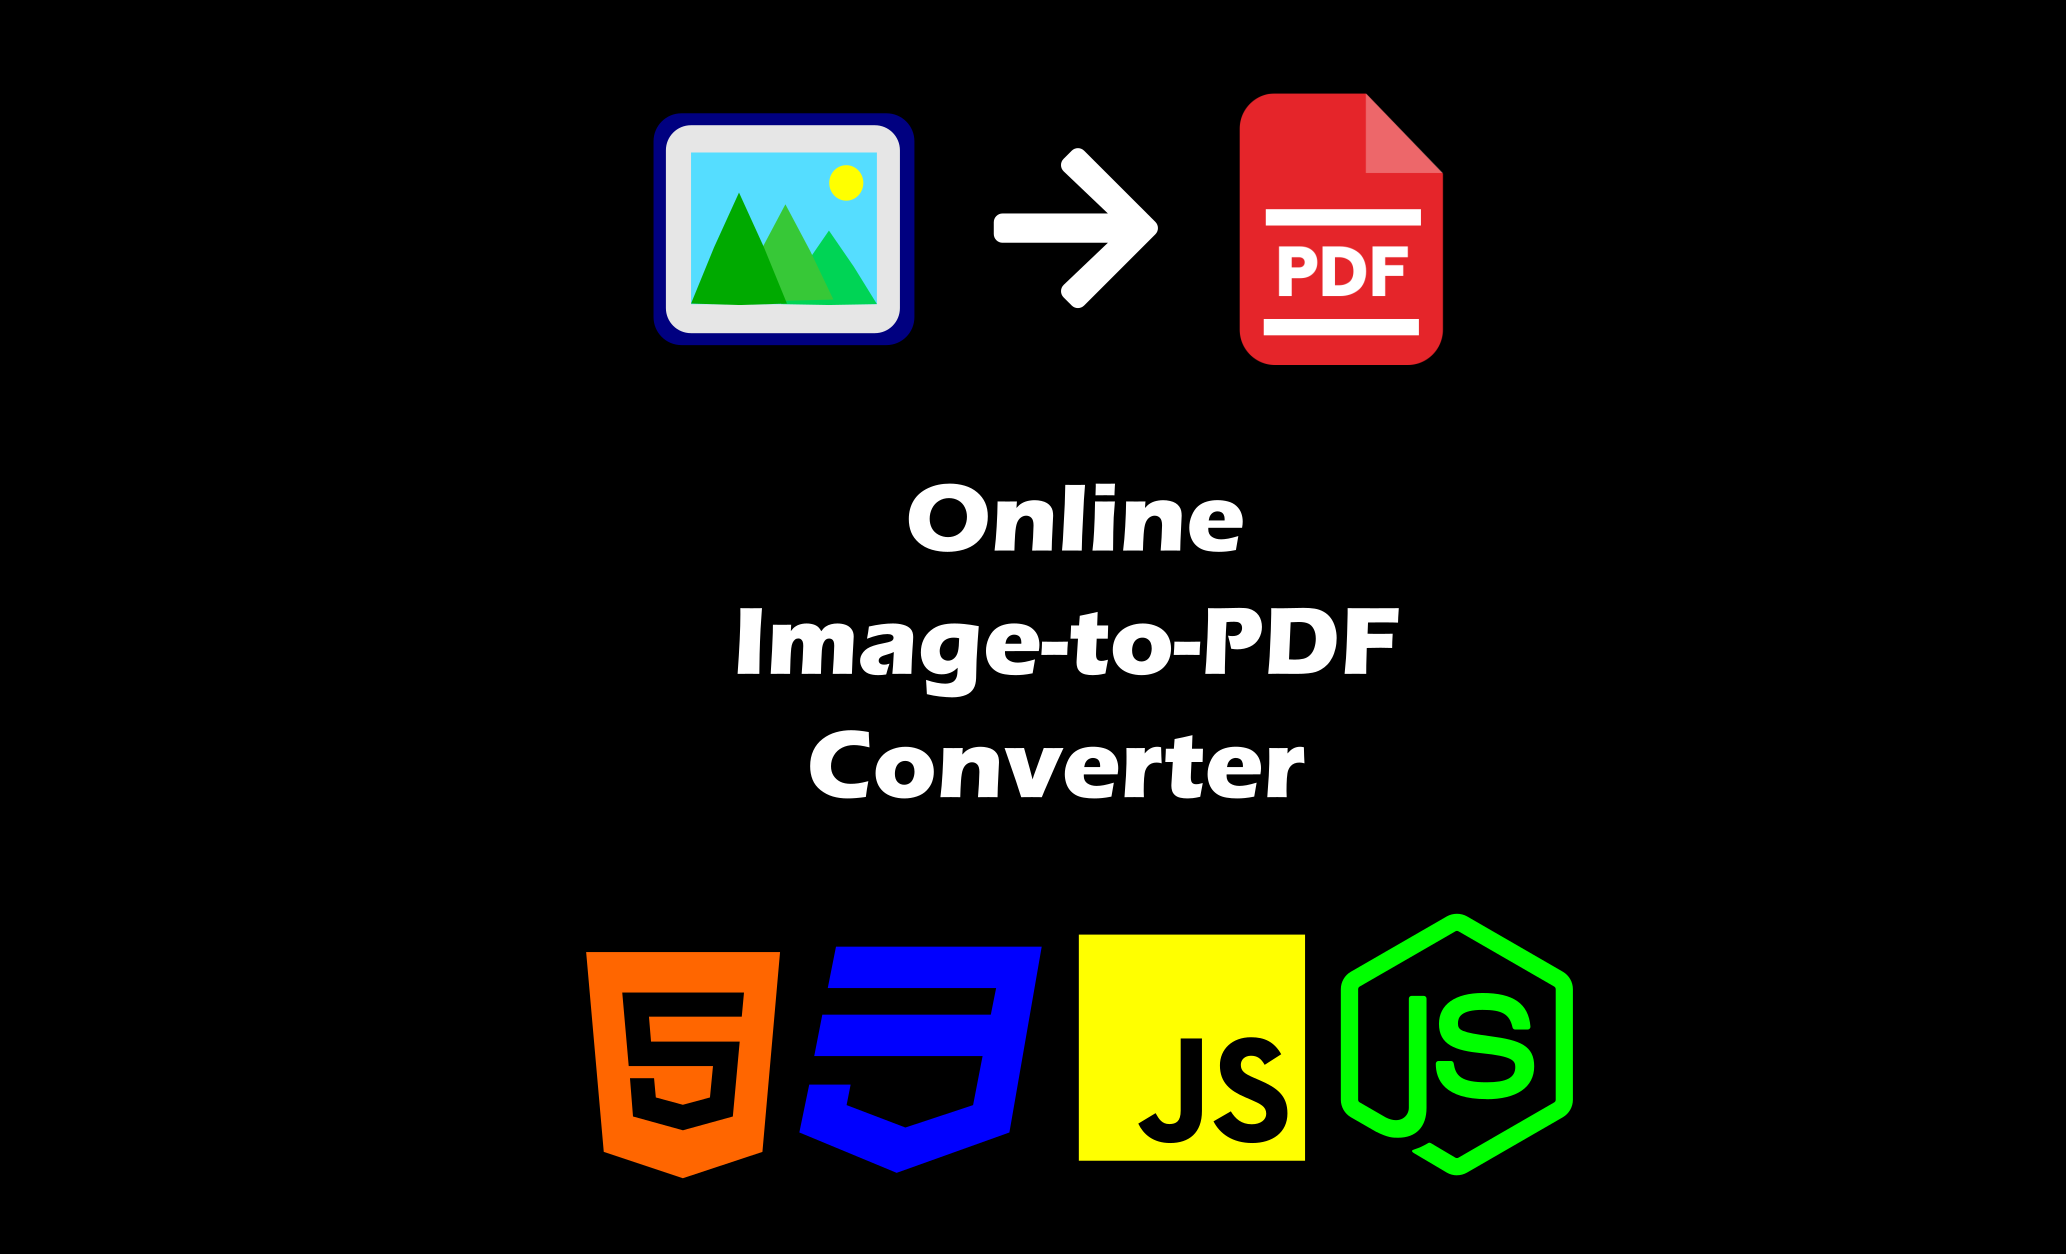 How to Build an Online Image-to-PDF Converter with HTML, CSS, JS, and NodeJS